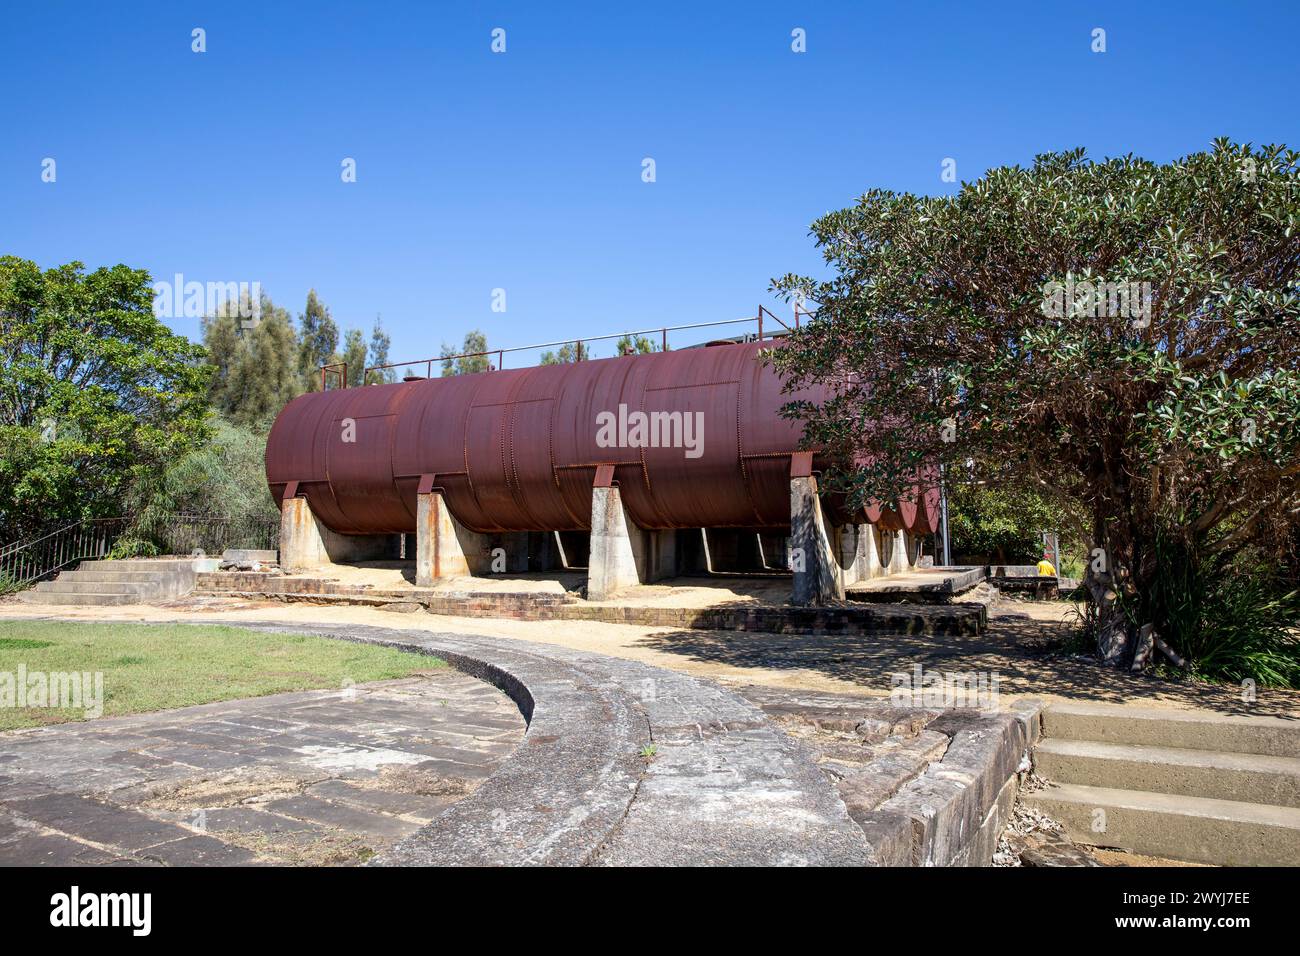 Ballast Point park and its industrial past includes tank 101 and oil storage tanks from refinery days,Sydney harbour,NSW,Australia Stock Photo